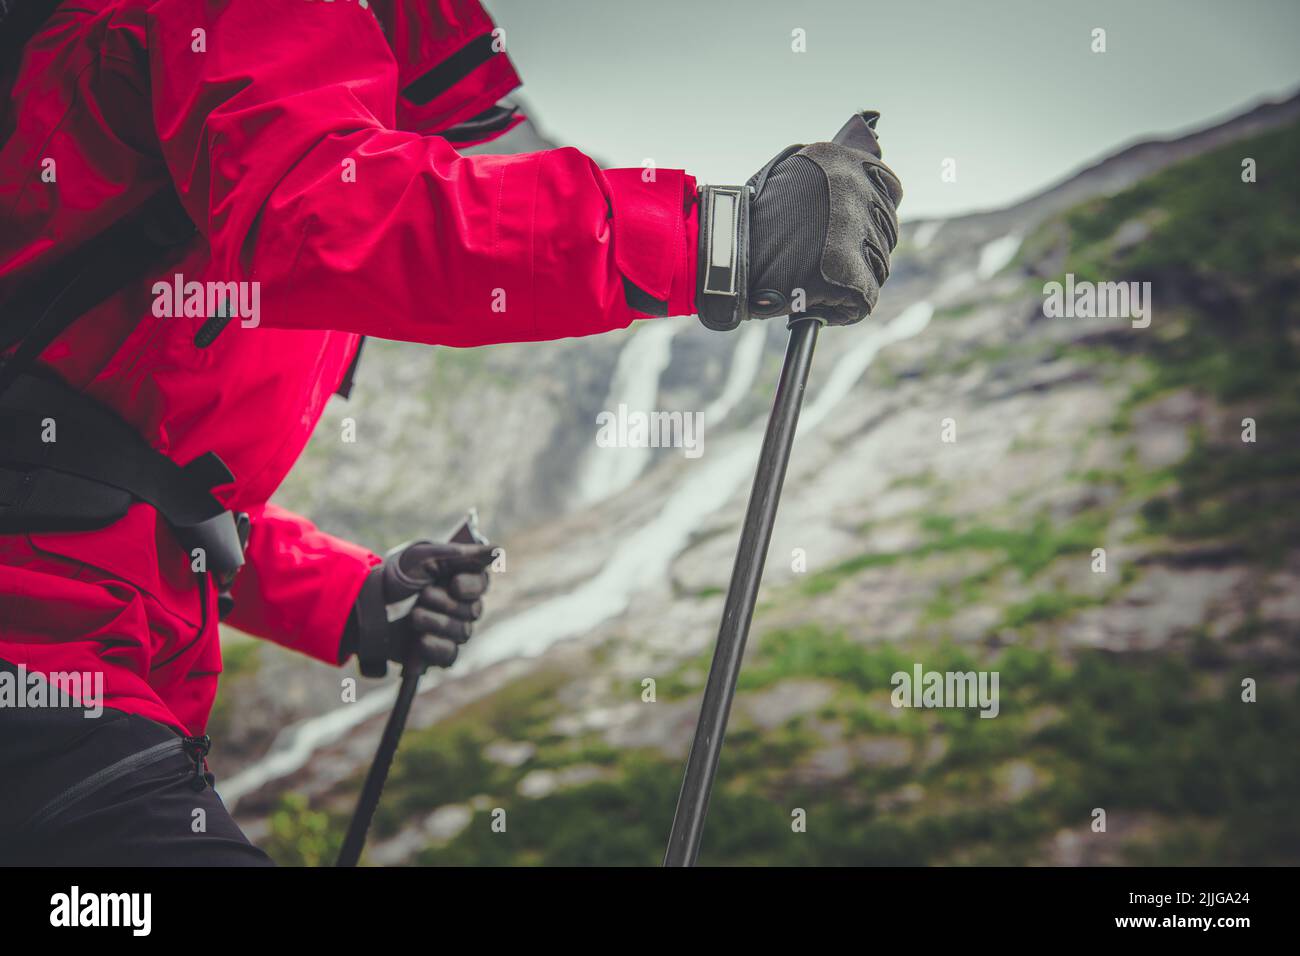 A Person in Red Winter Jacket and Protective Gloves Hiking With Poles and Backpack Among the Scenic Mountain Views. Outdoor Activities Theme. Stock Photo